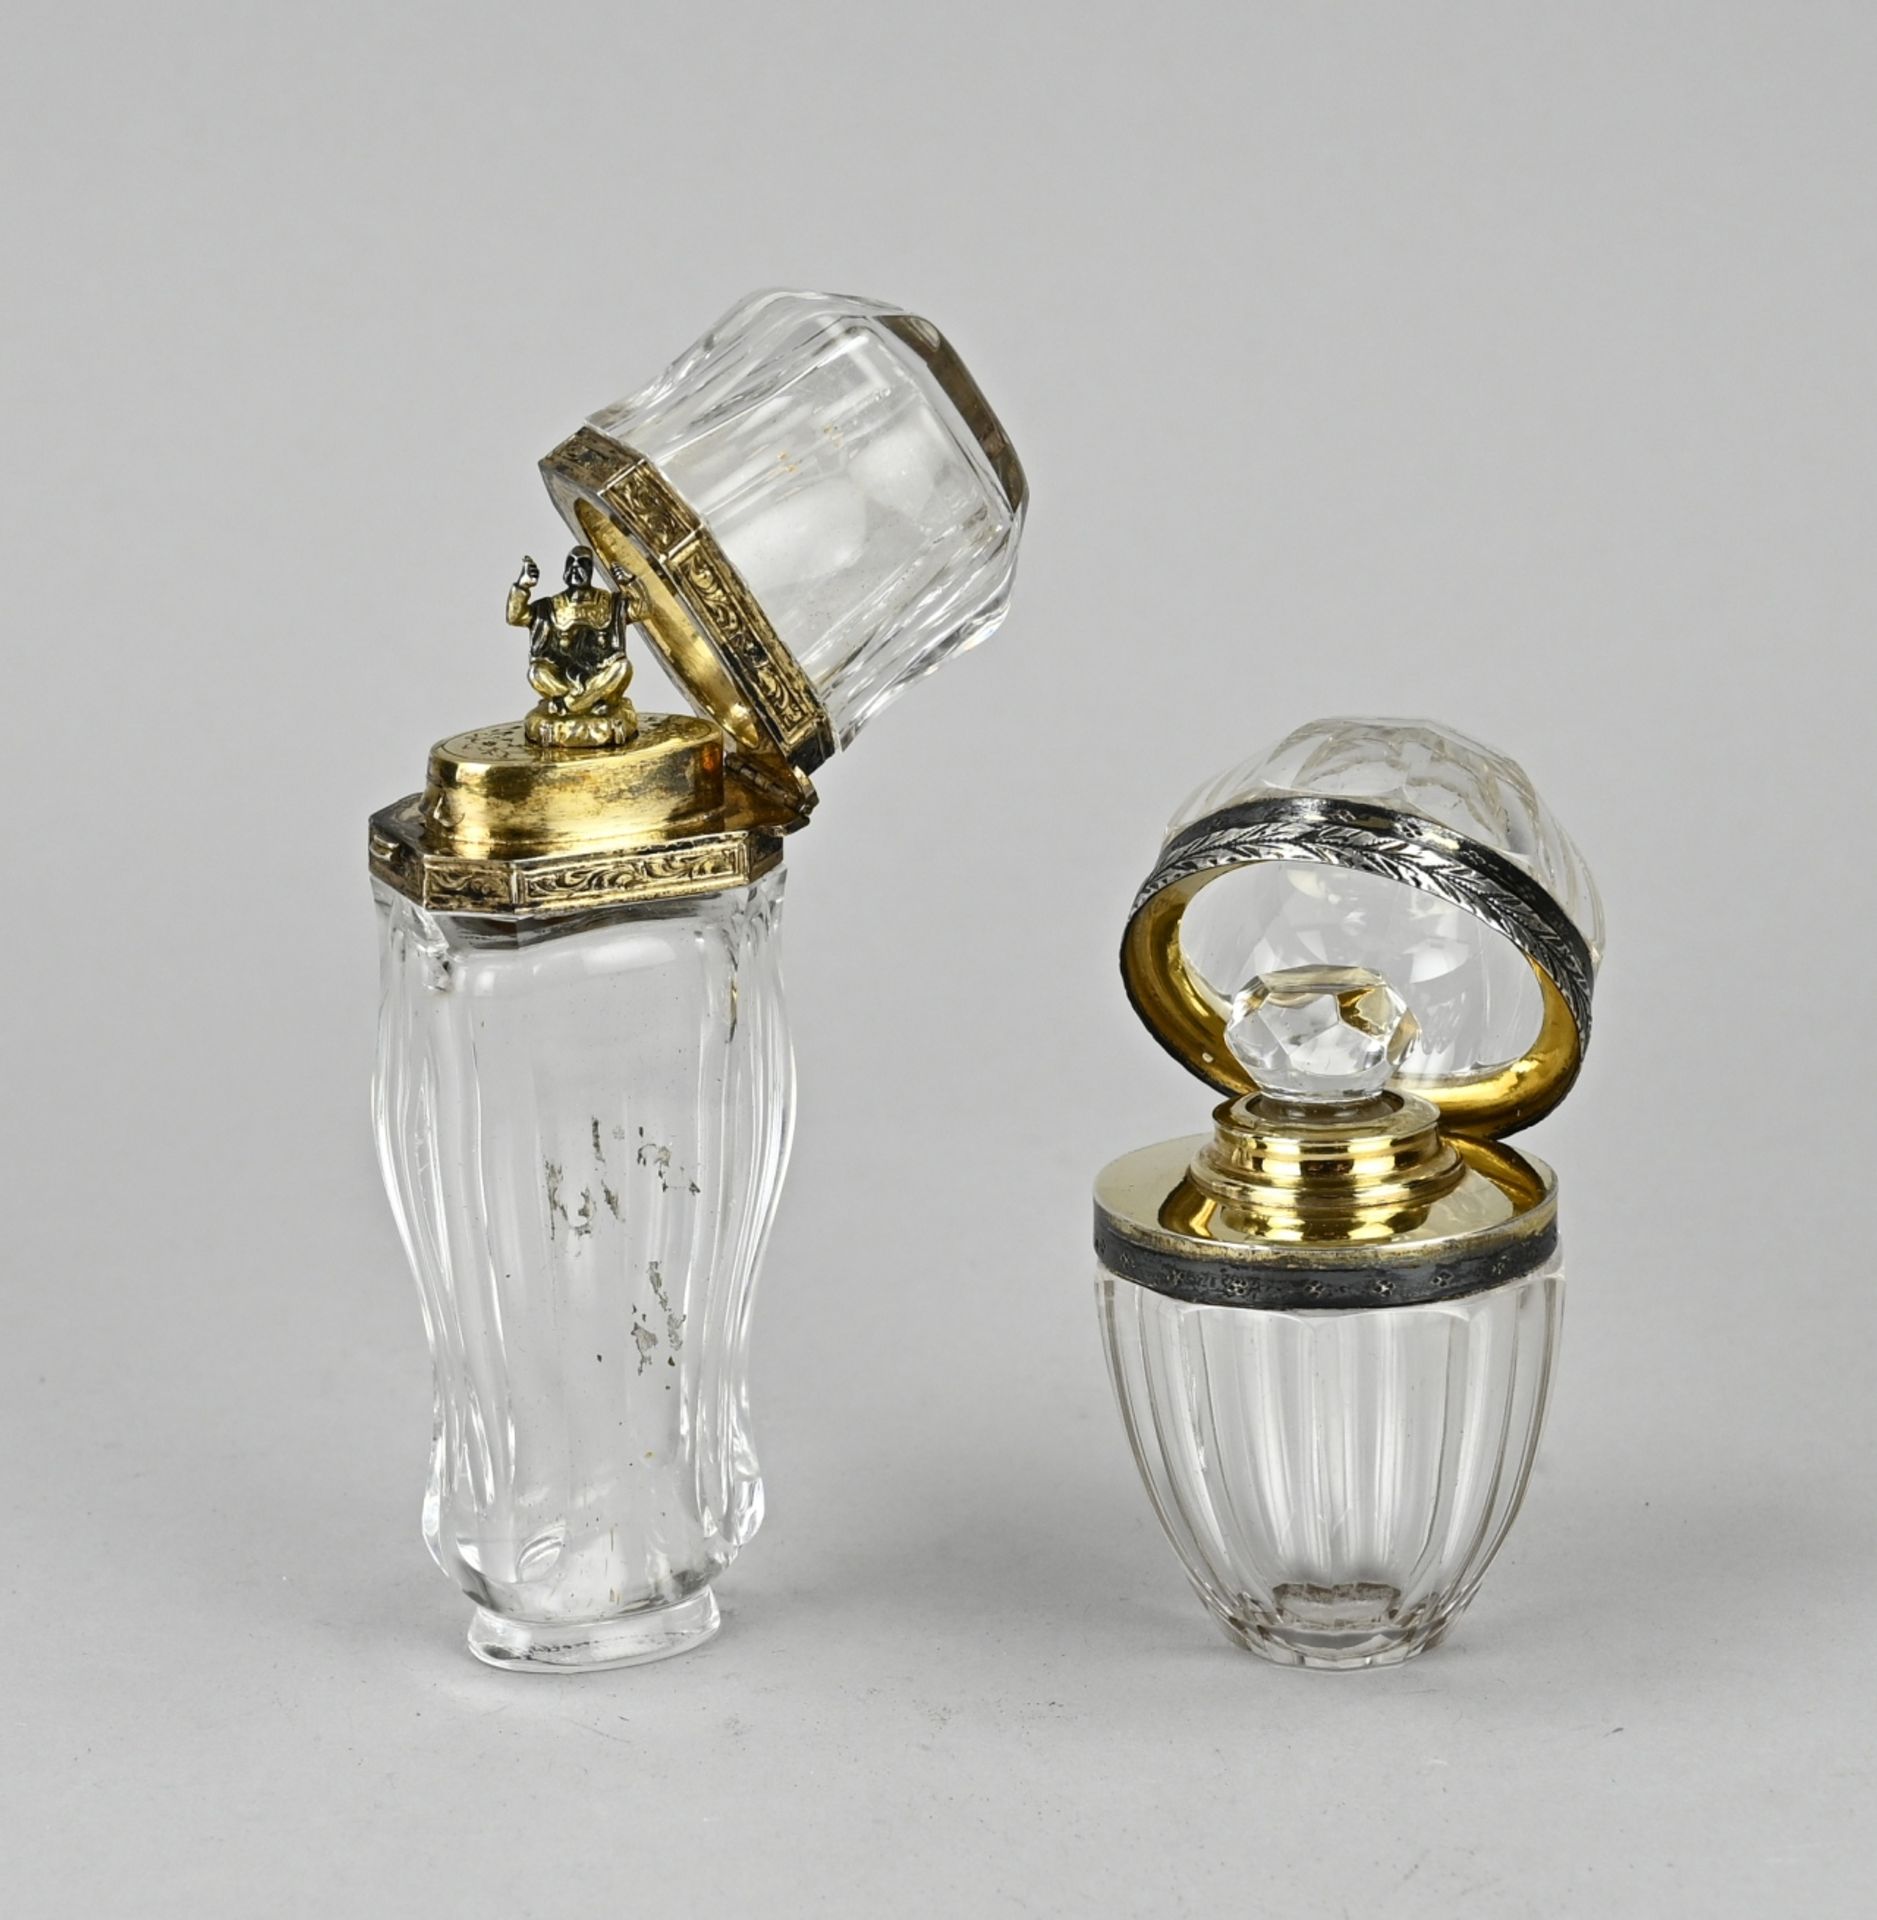 Two perfume bottles, silver gold plated